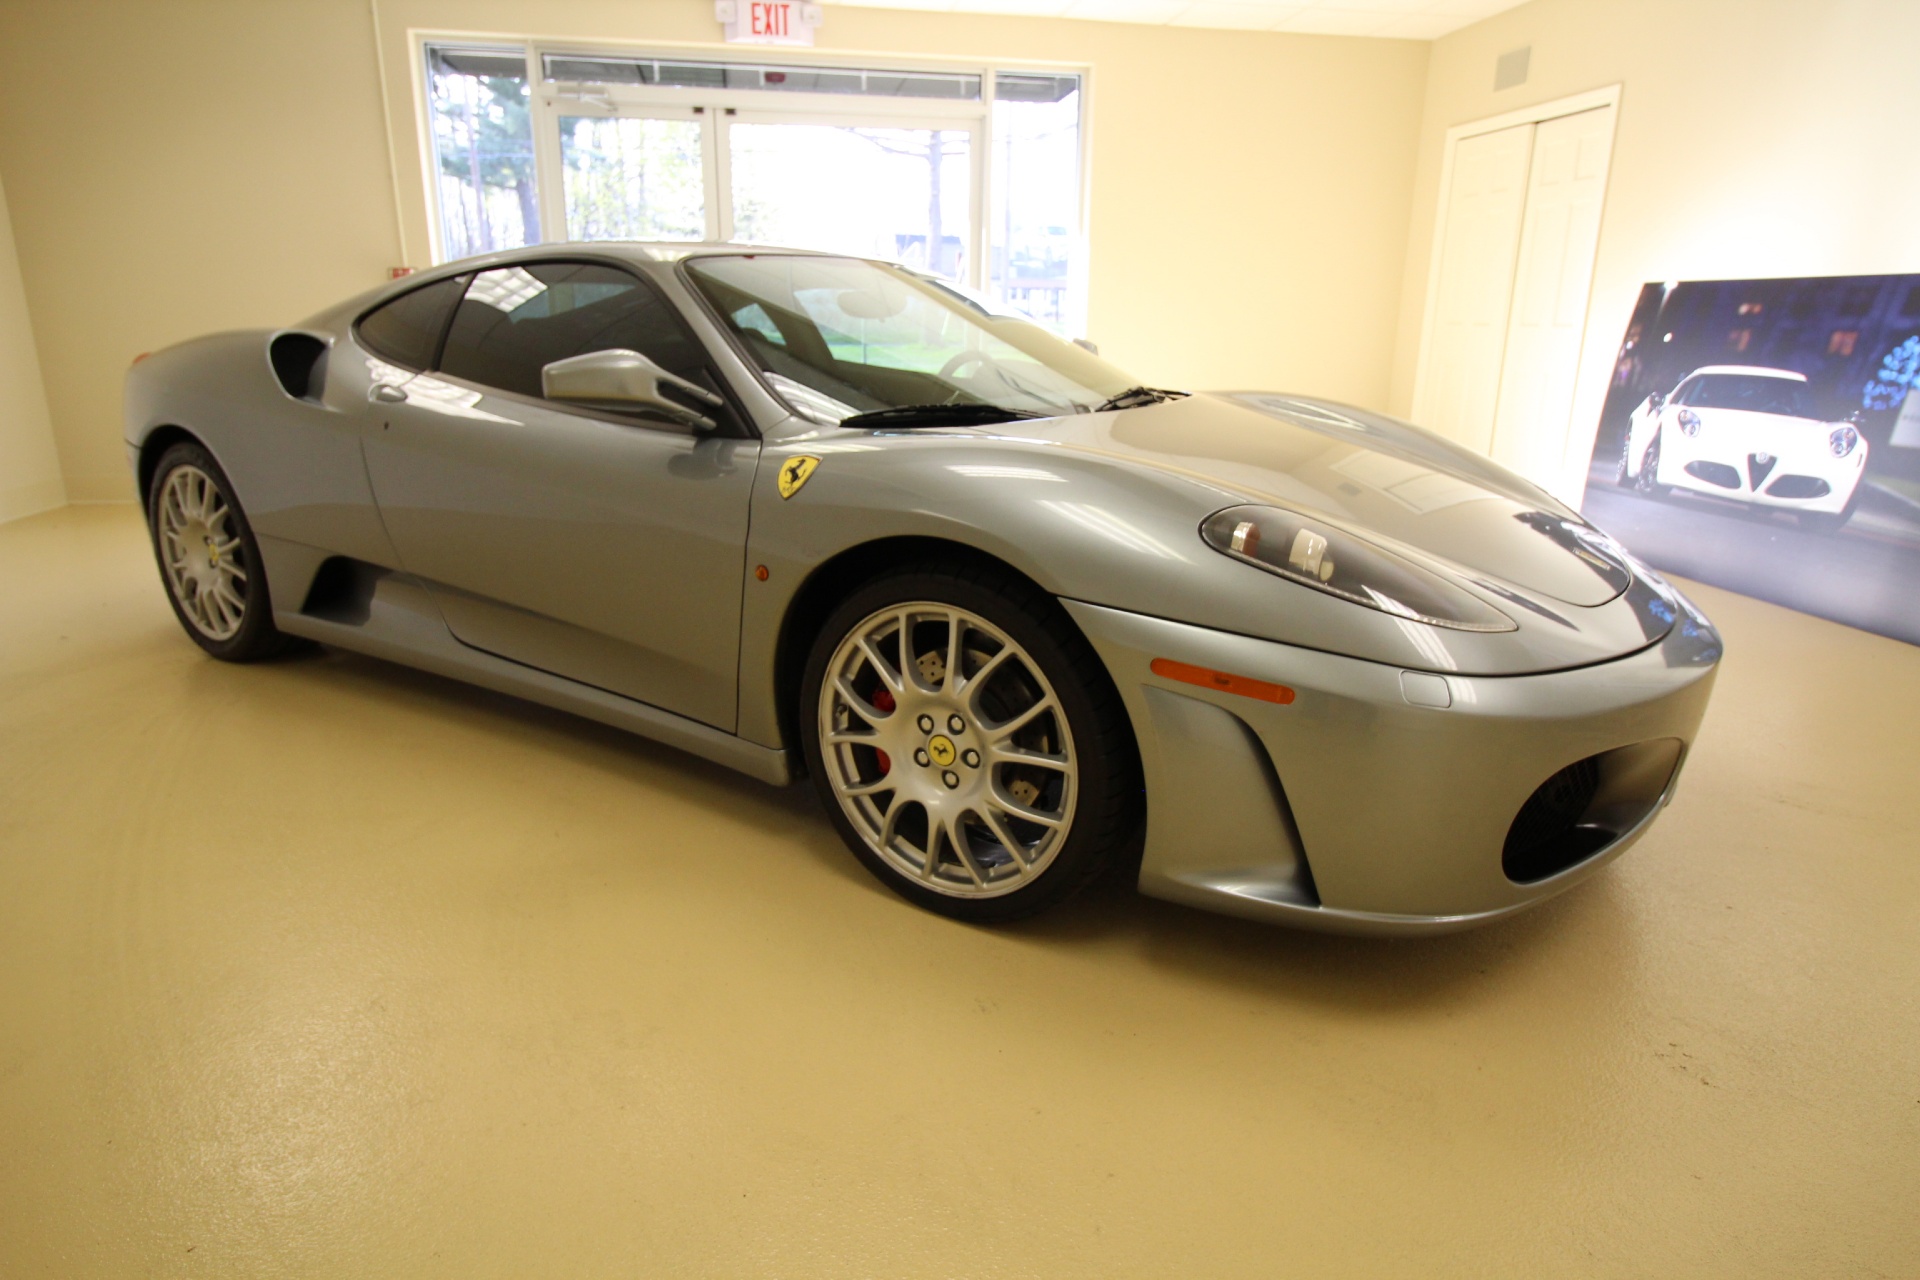 Used 2005 Gray Ferrari F430 COUPE,SUPERB CONDITION,SHIELDS,RED CALIPERS,CHALLENGE RIMS | Albany, NY